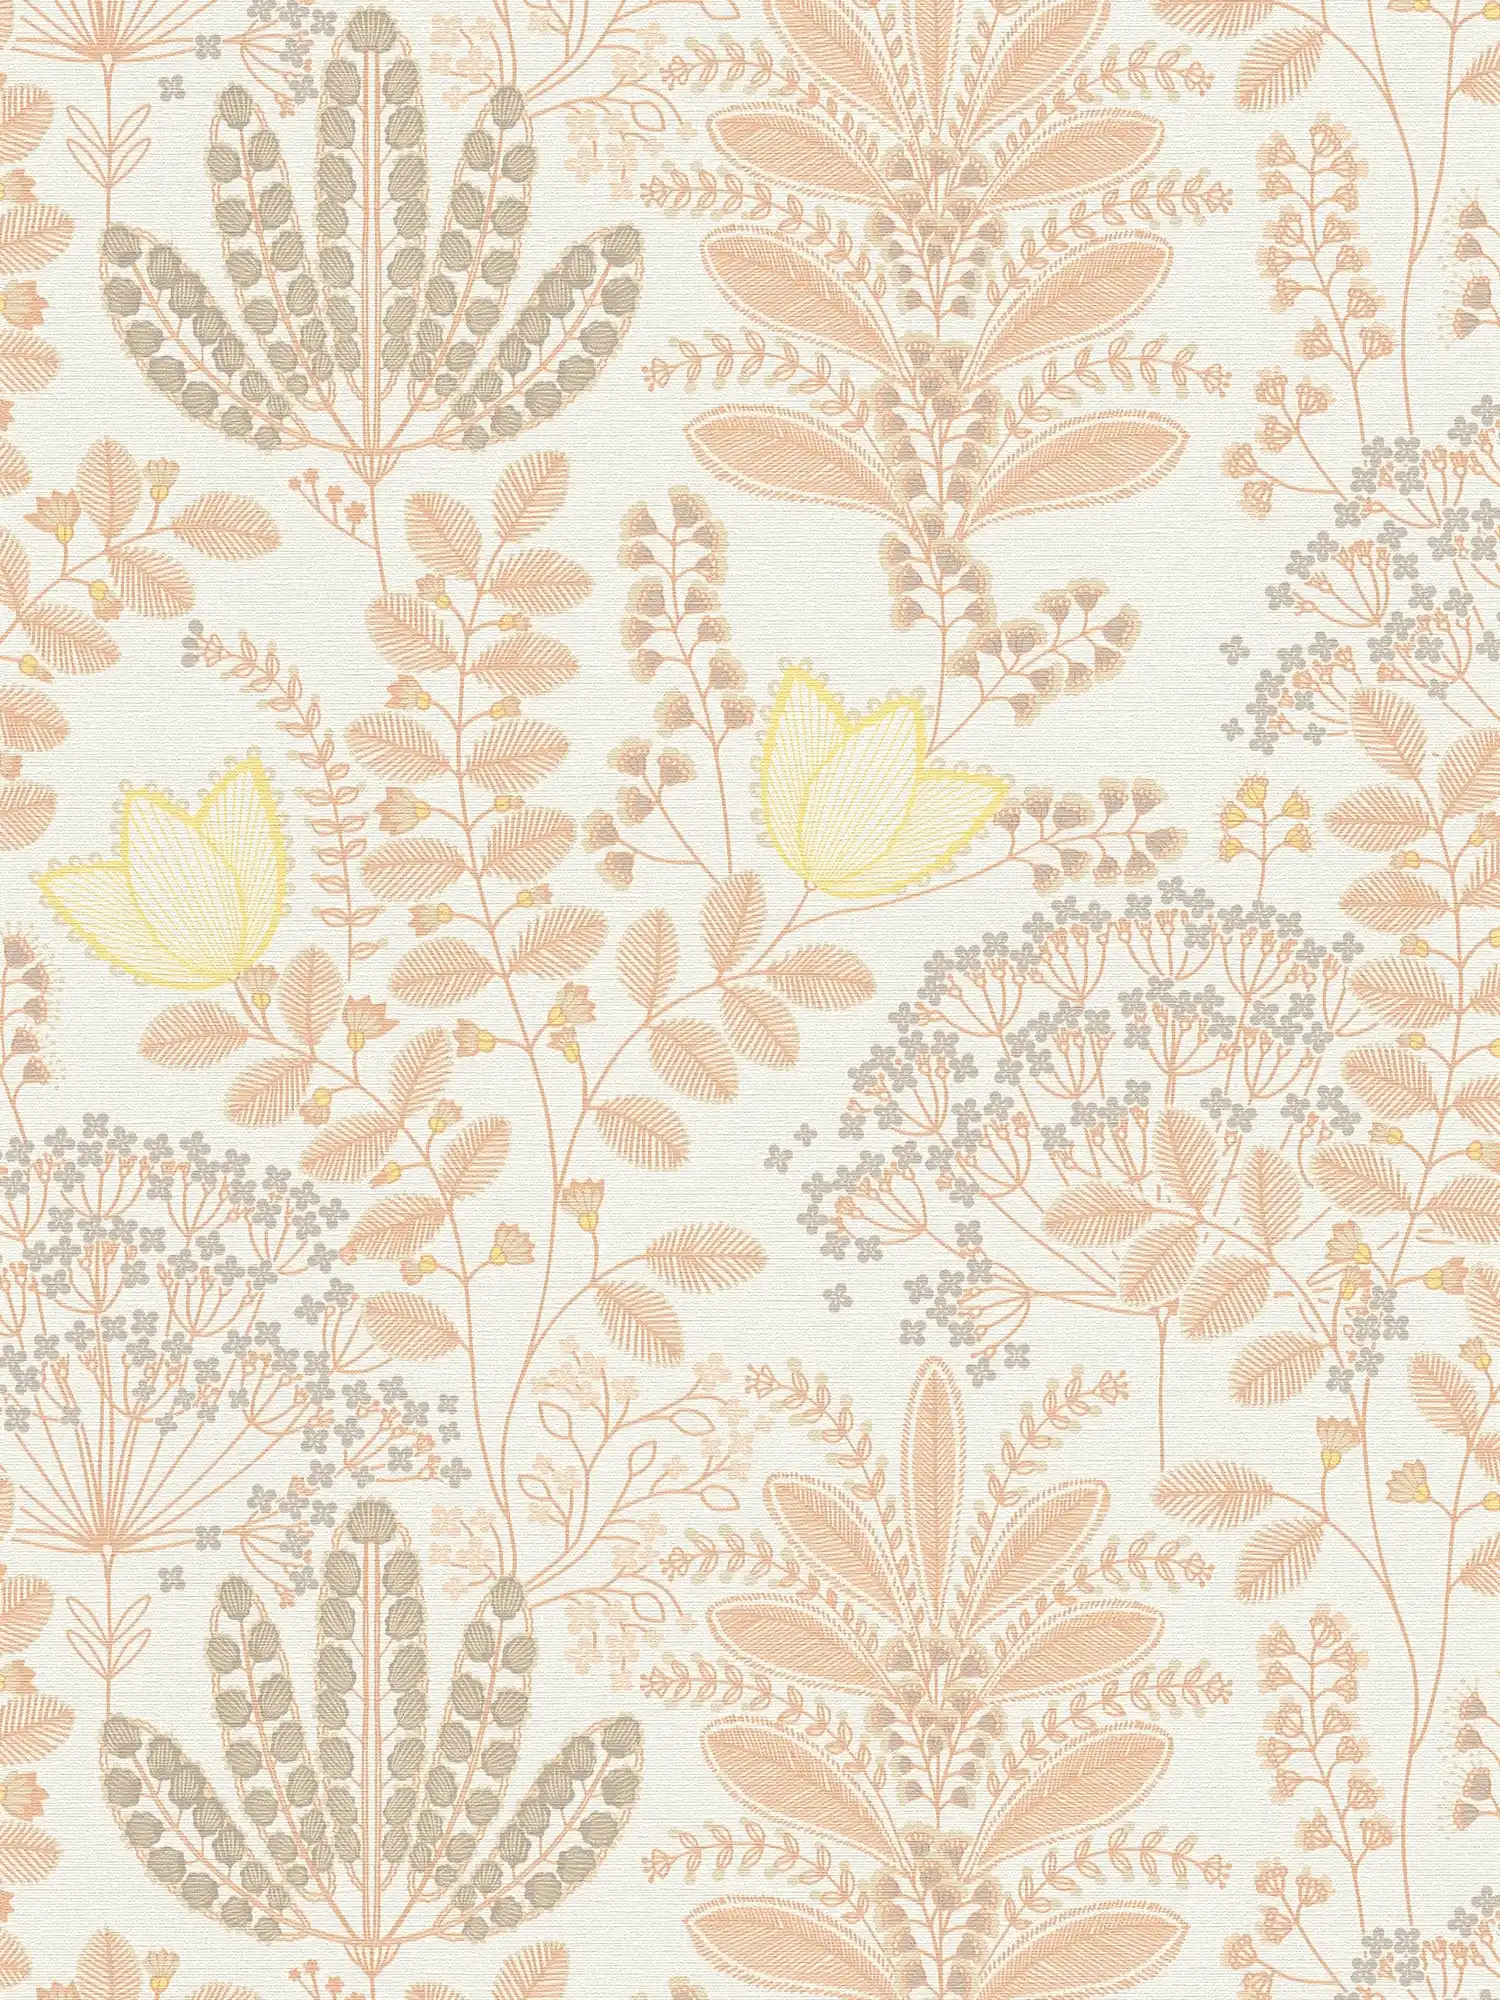 Floral wallpaper with leaves in retro style slightly textured, matt - white, orange, yellow
